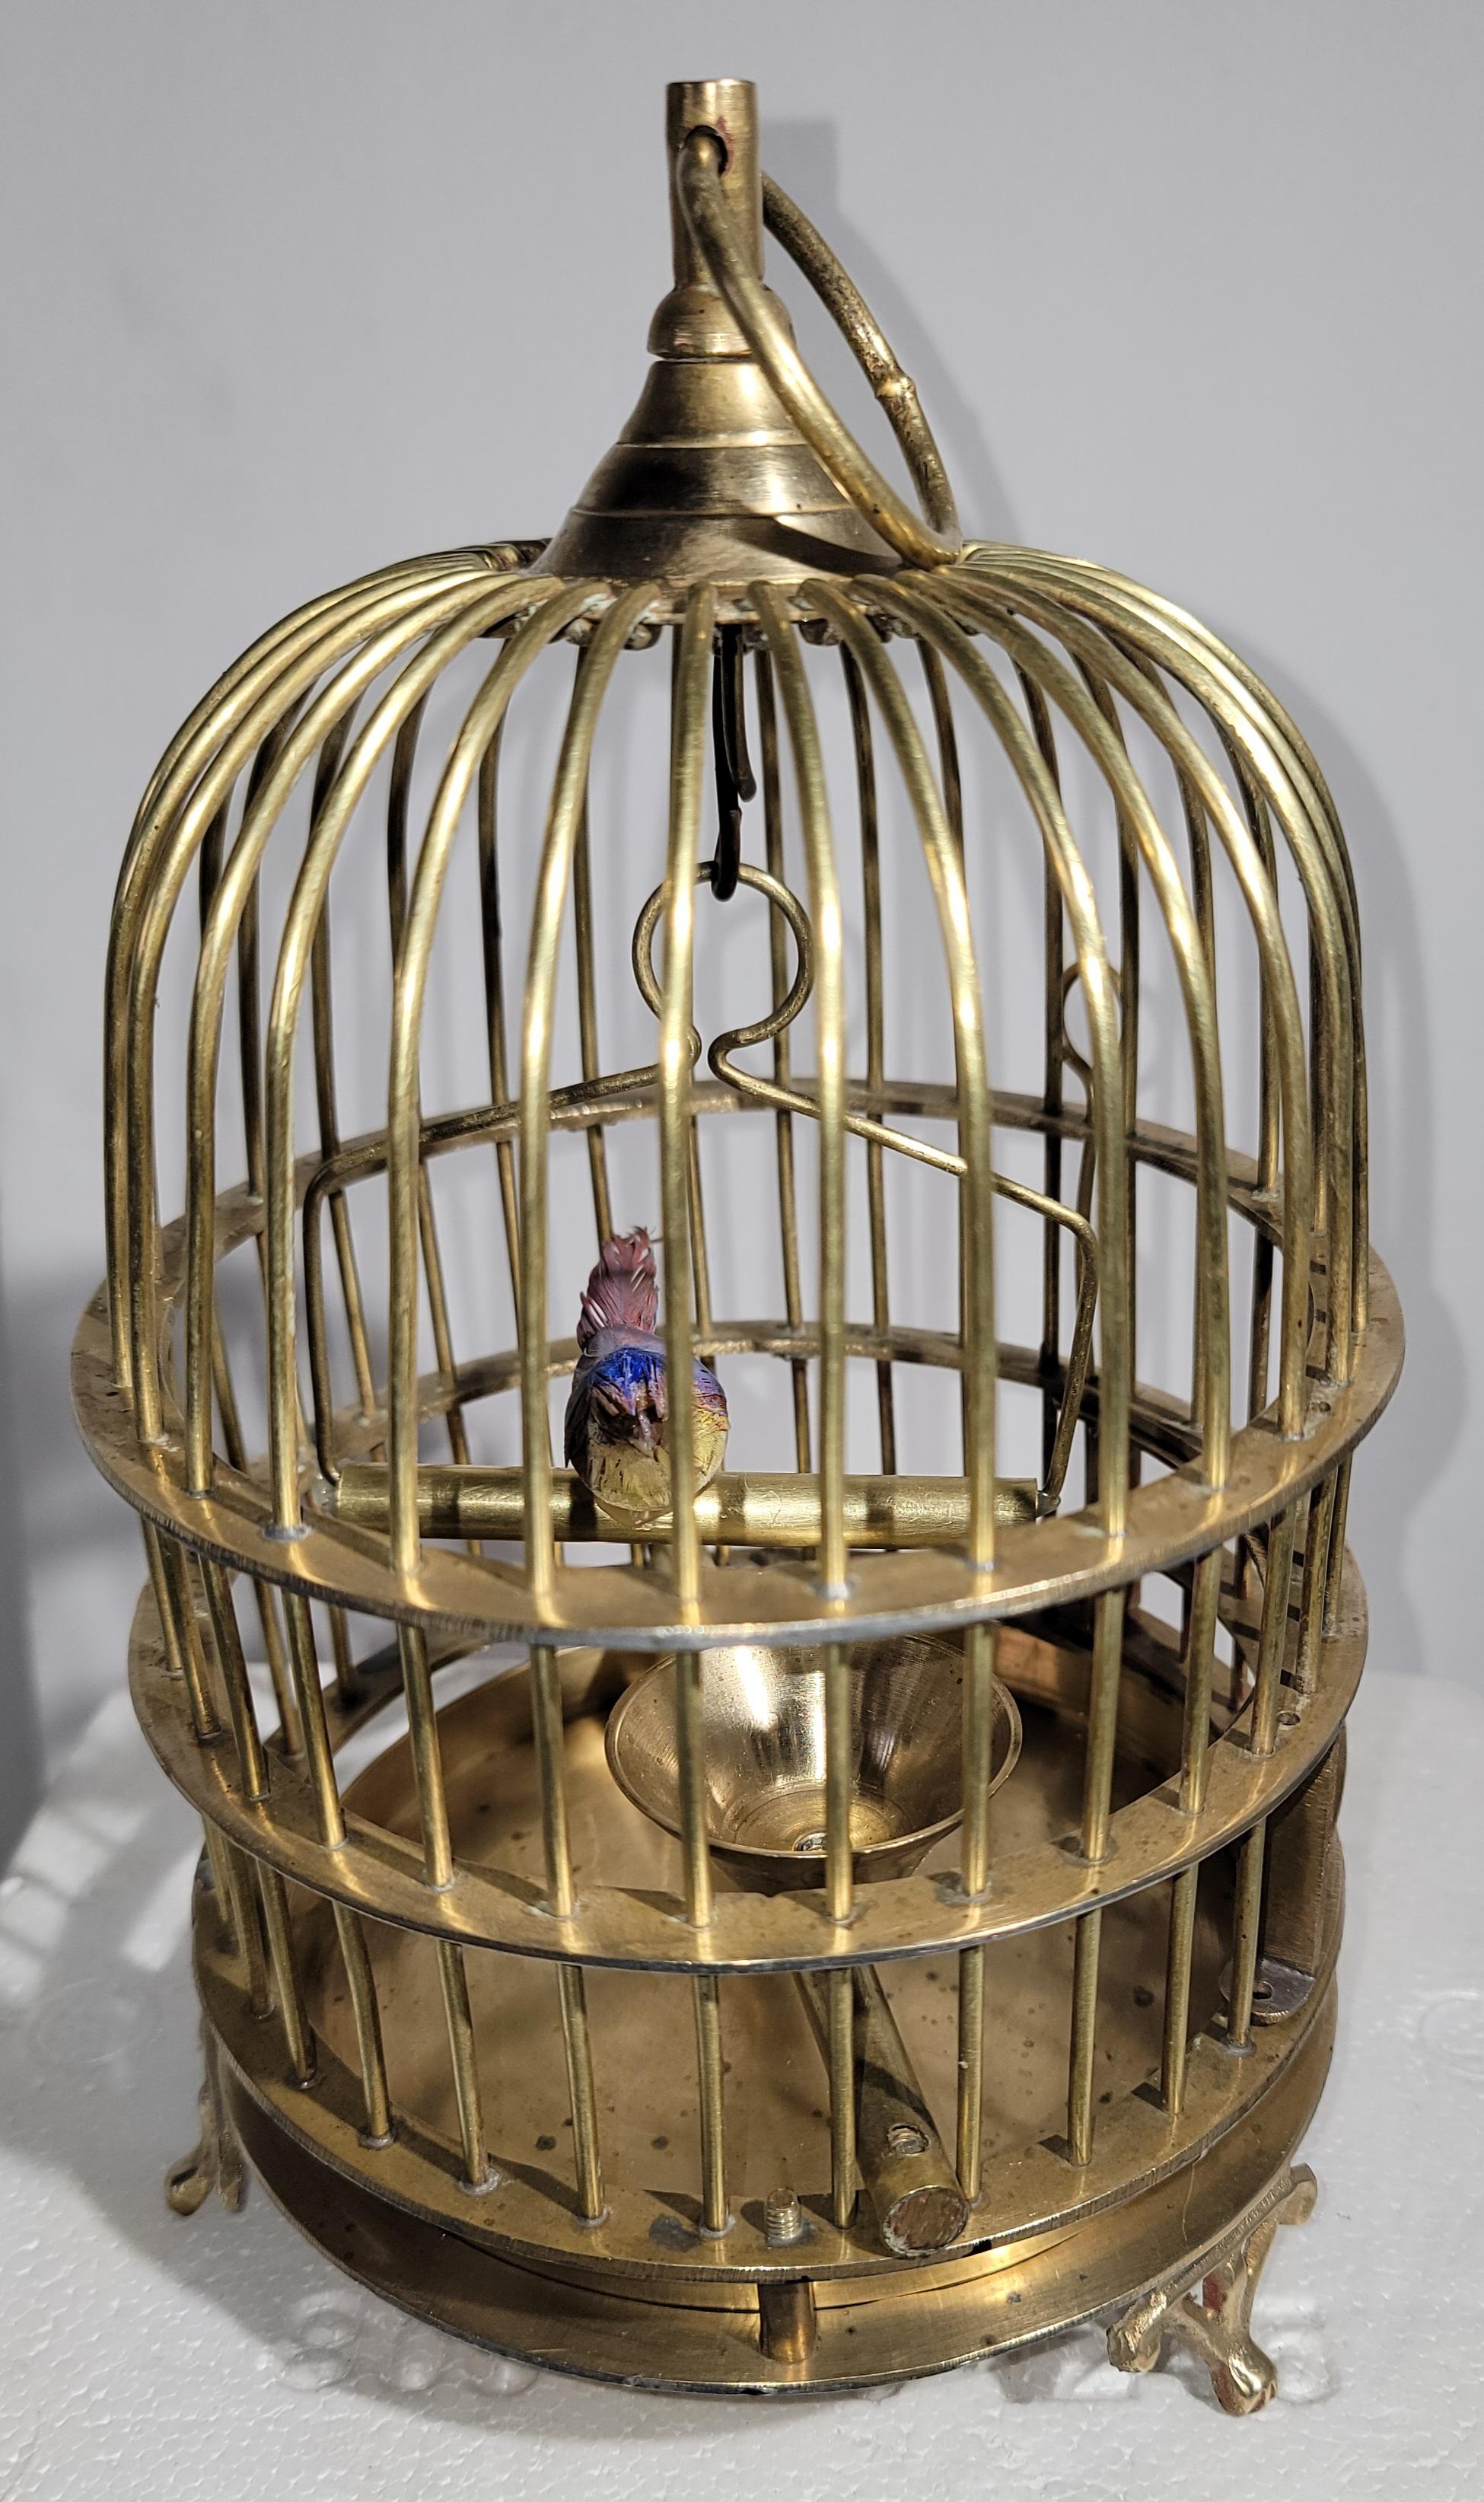 This mini brass bird cage has a bird inside and really could be used for a tiny bird.The condition is very good and it has been polished.